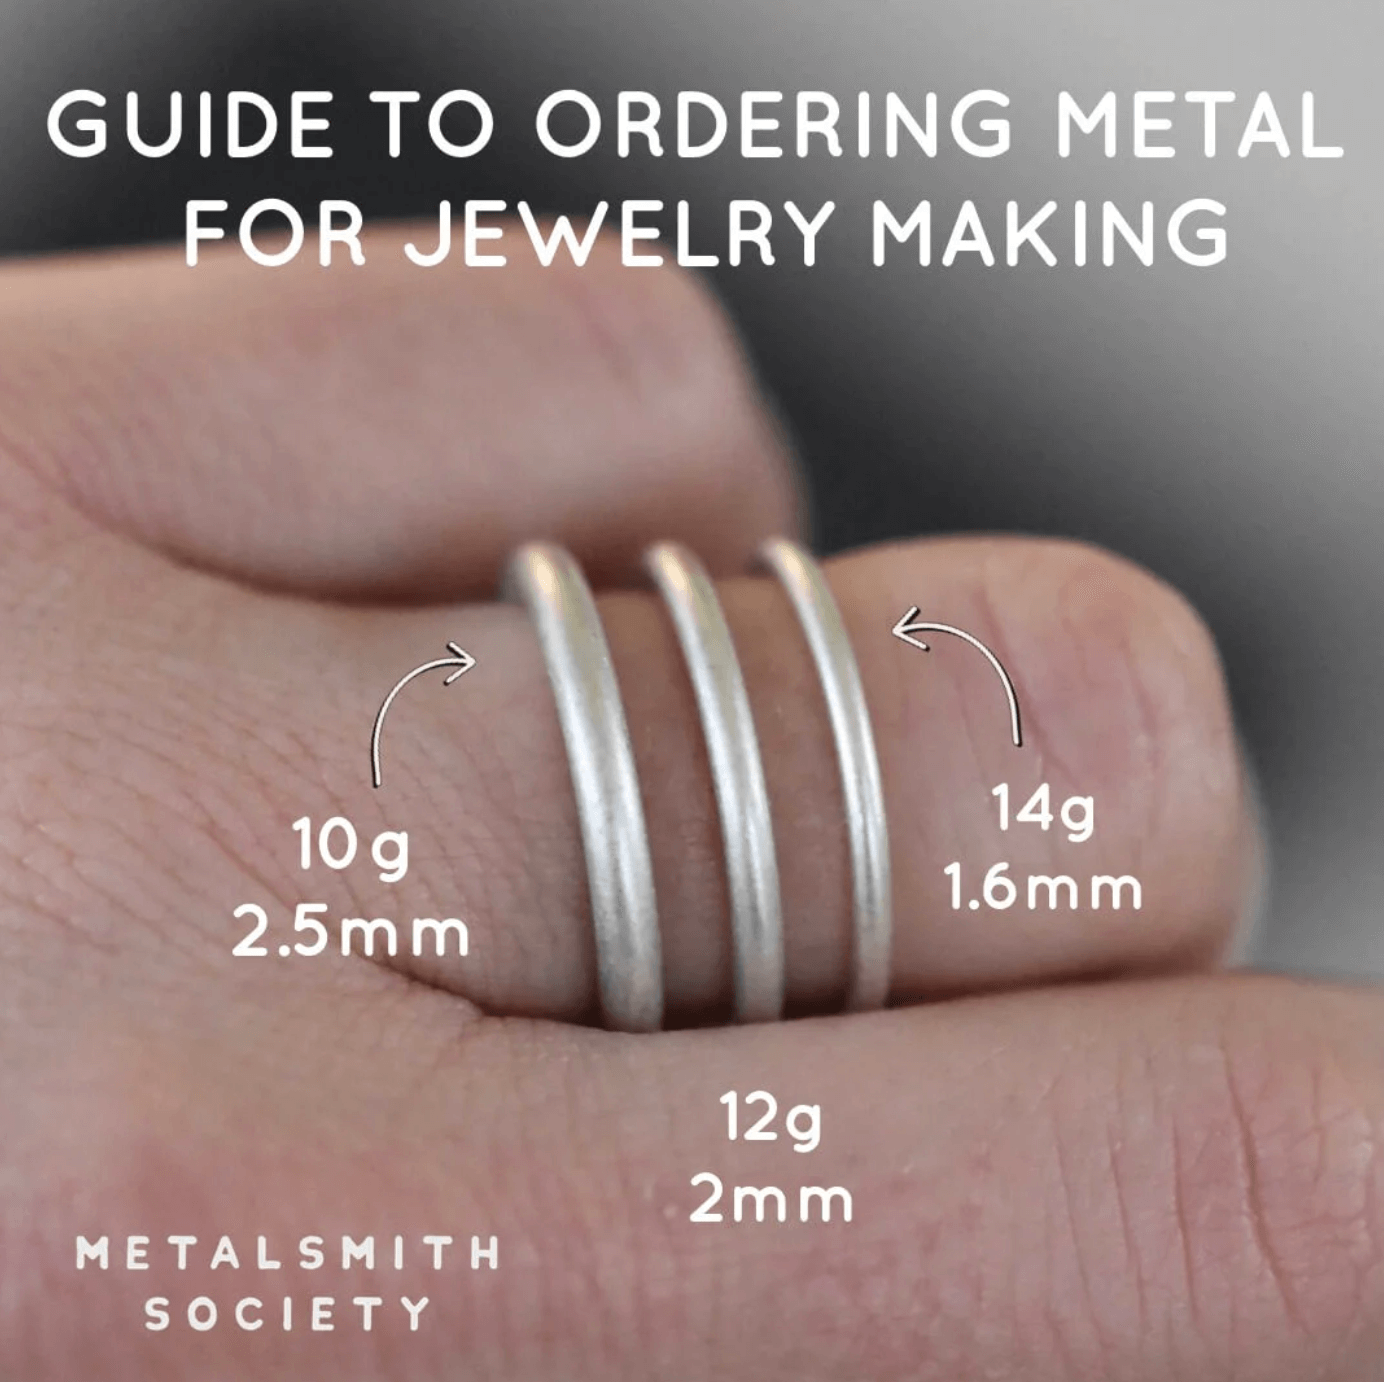 Guide to ordering metal for jewelry making.